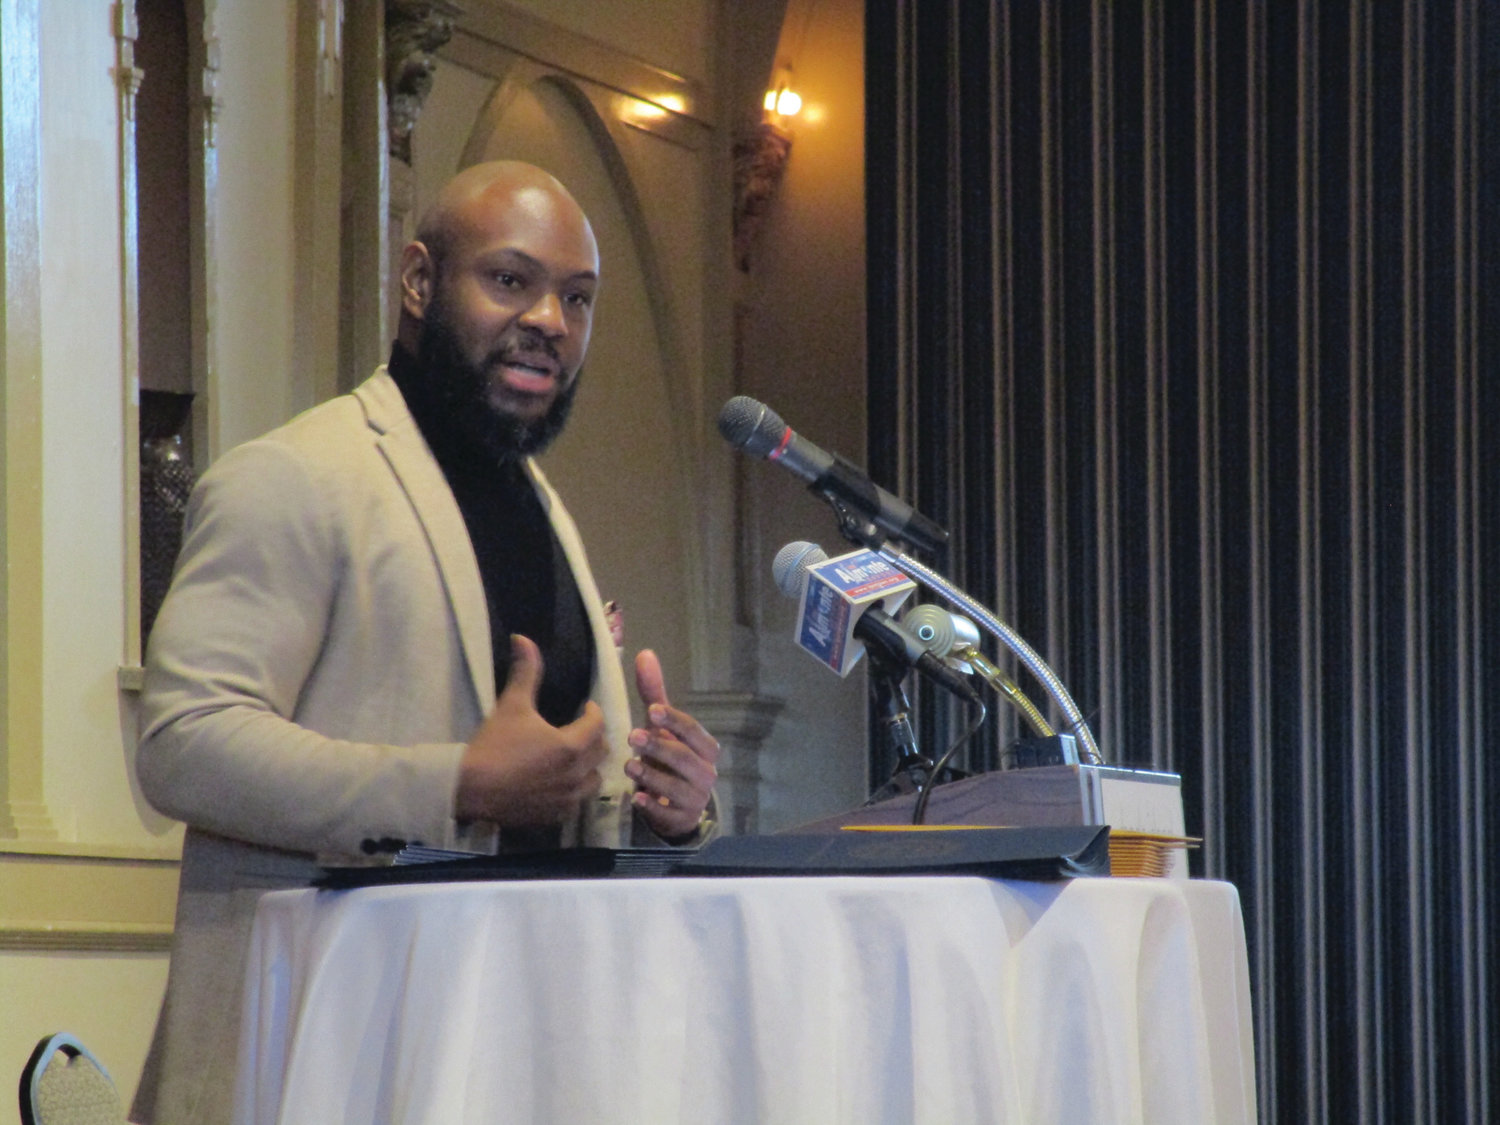 SEEING OPPORTUNITY: Carlon Howard provided the keynote address during Monday’s breakfast, pointing to Rhode Island’s small size as providing a unique opportunity to affect change.